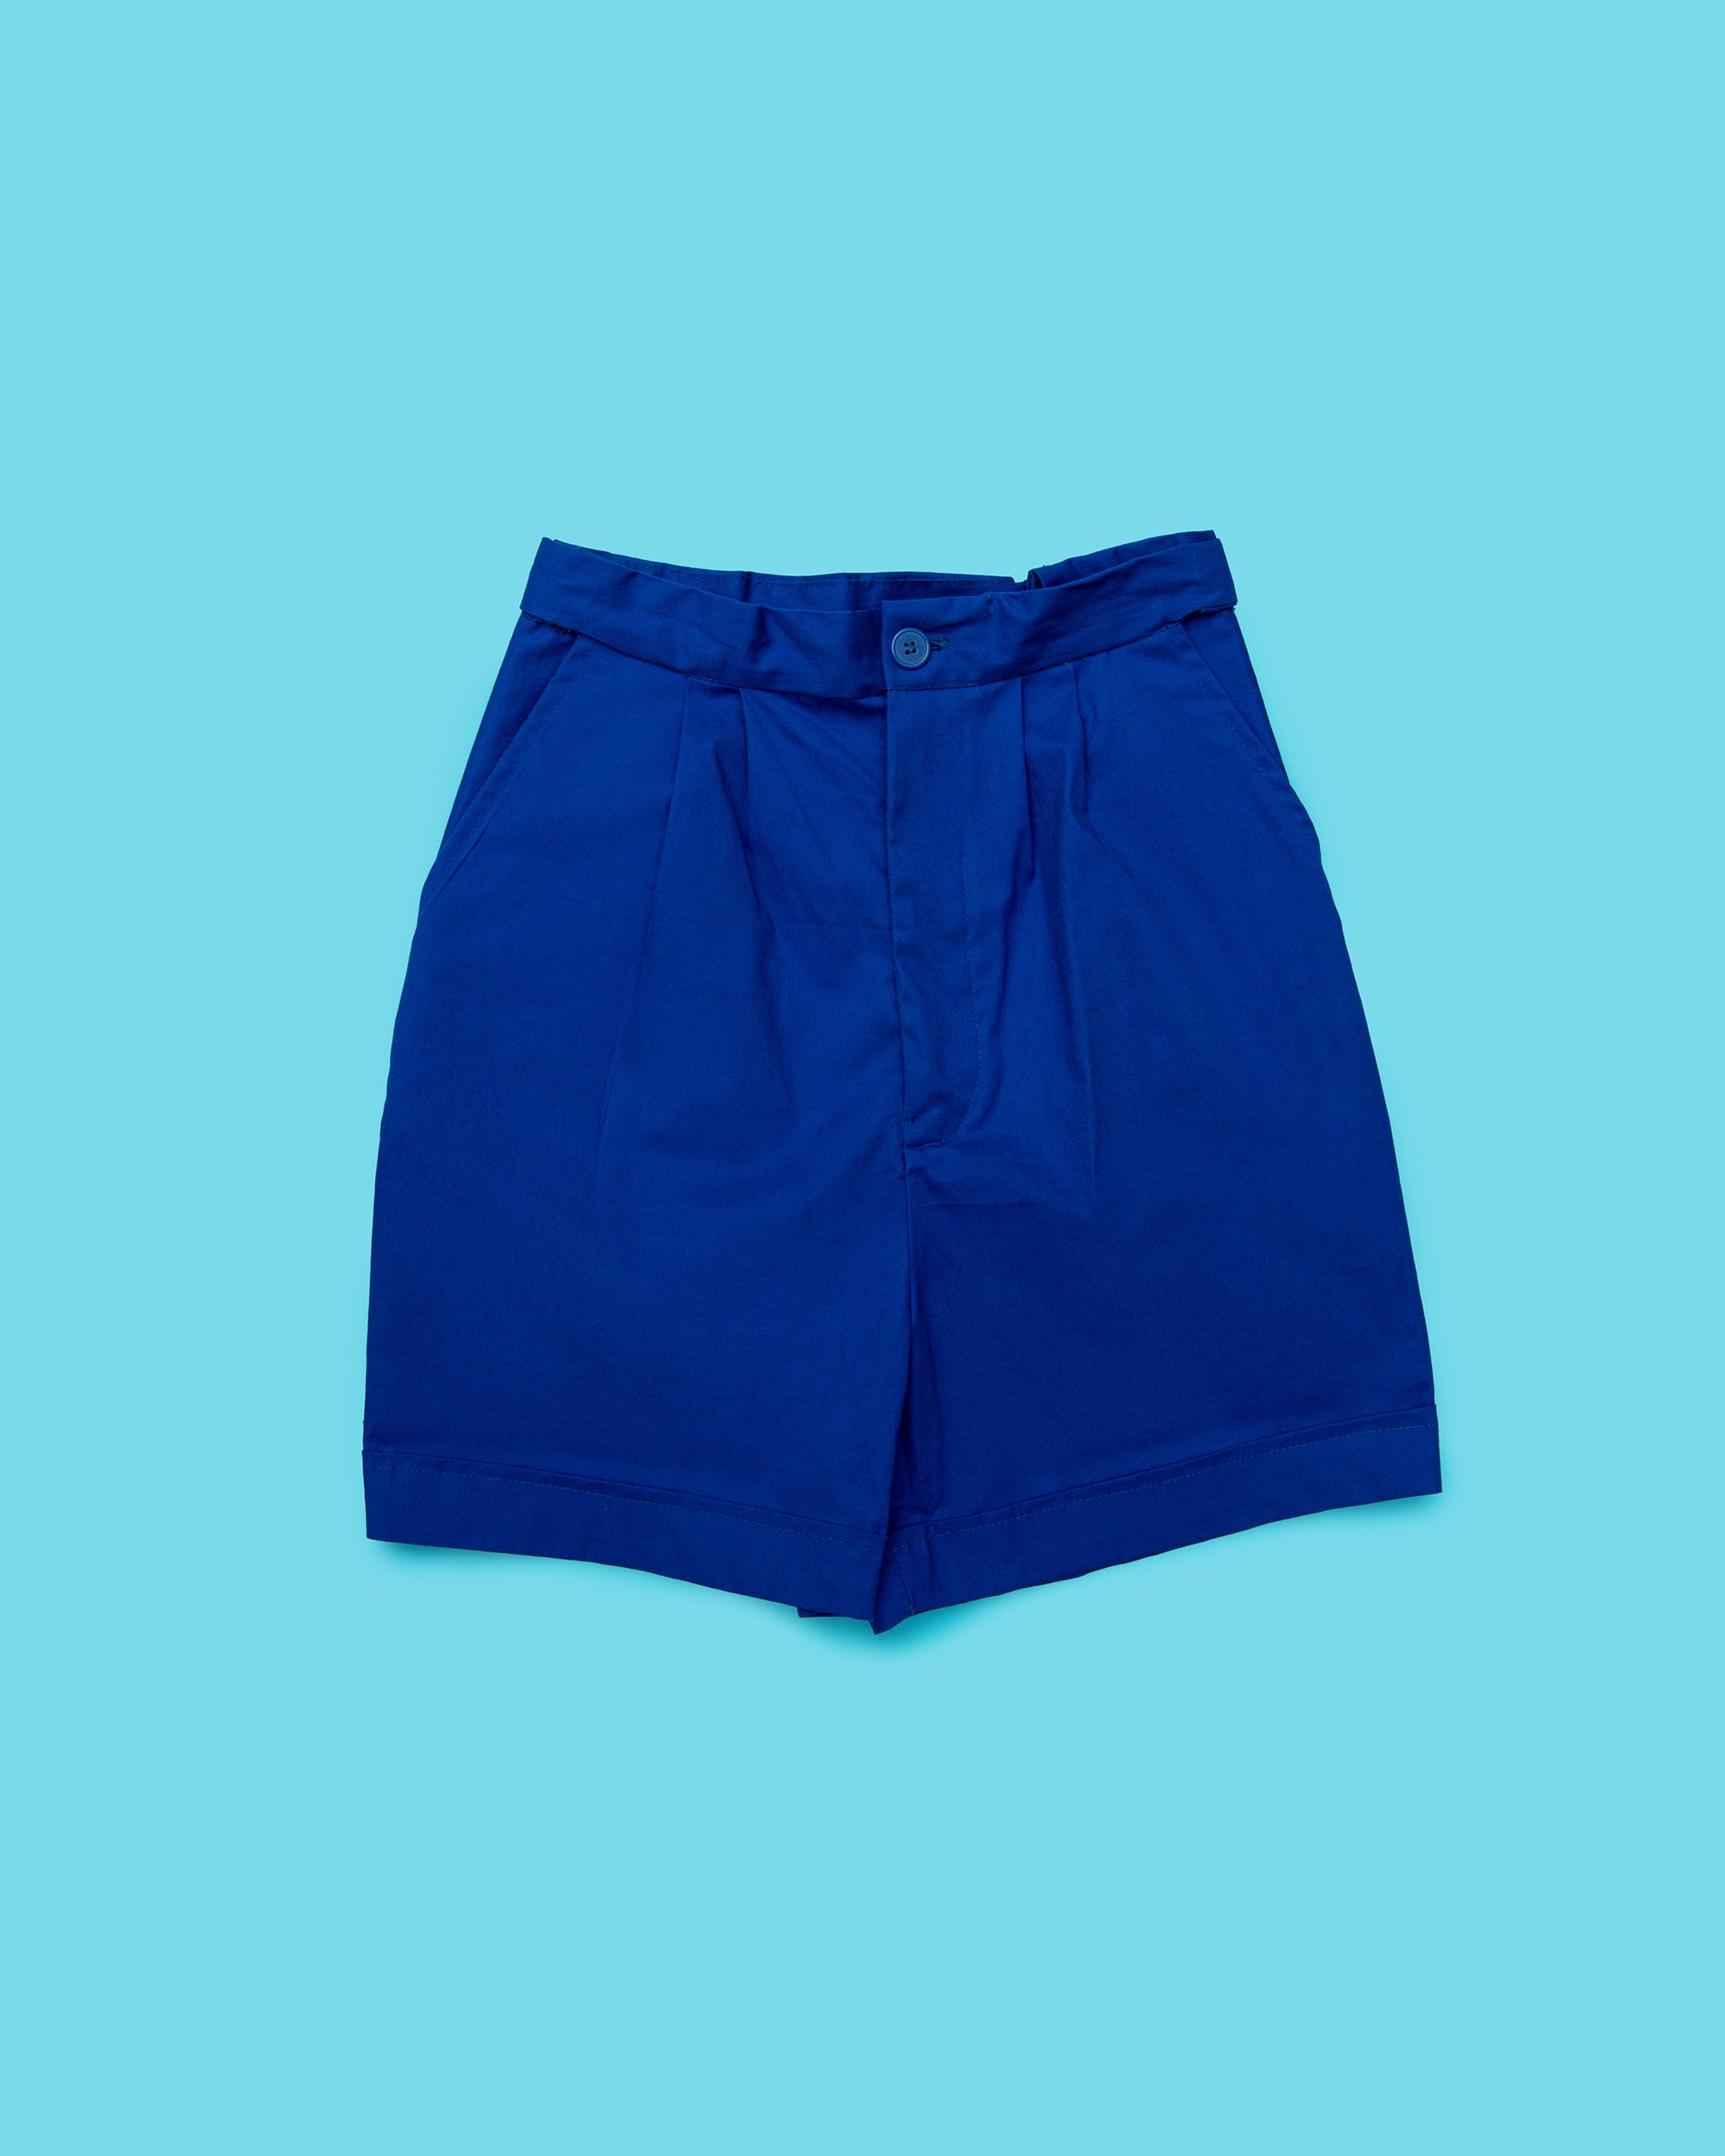 The Uniform Shorts in Blue